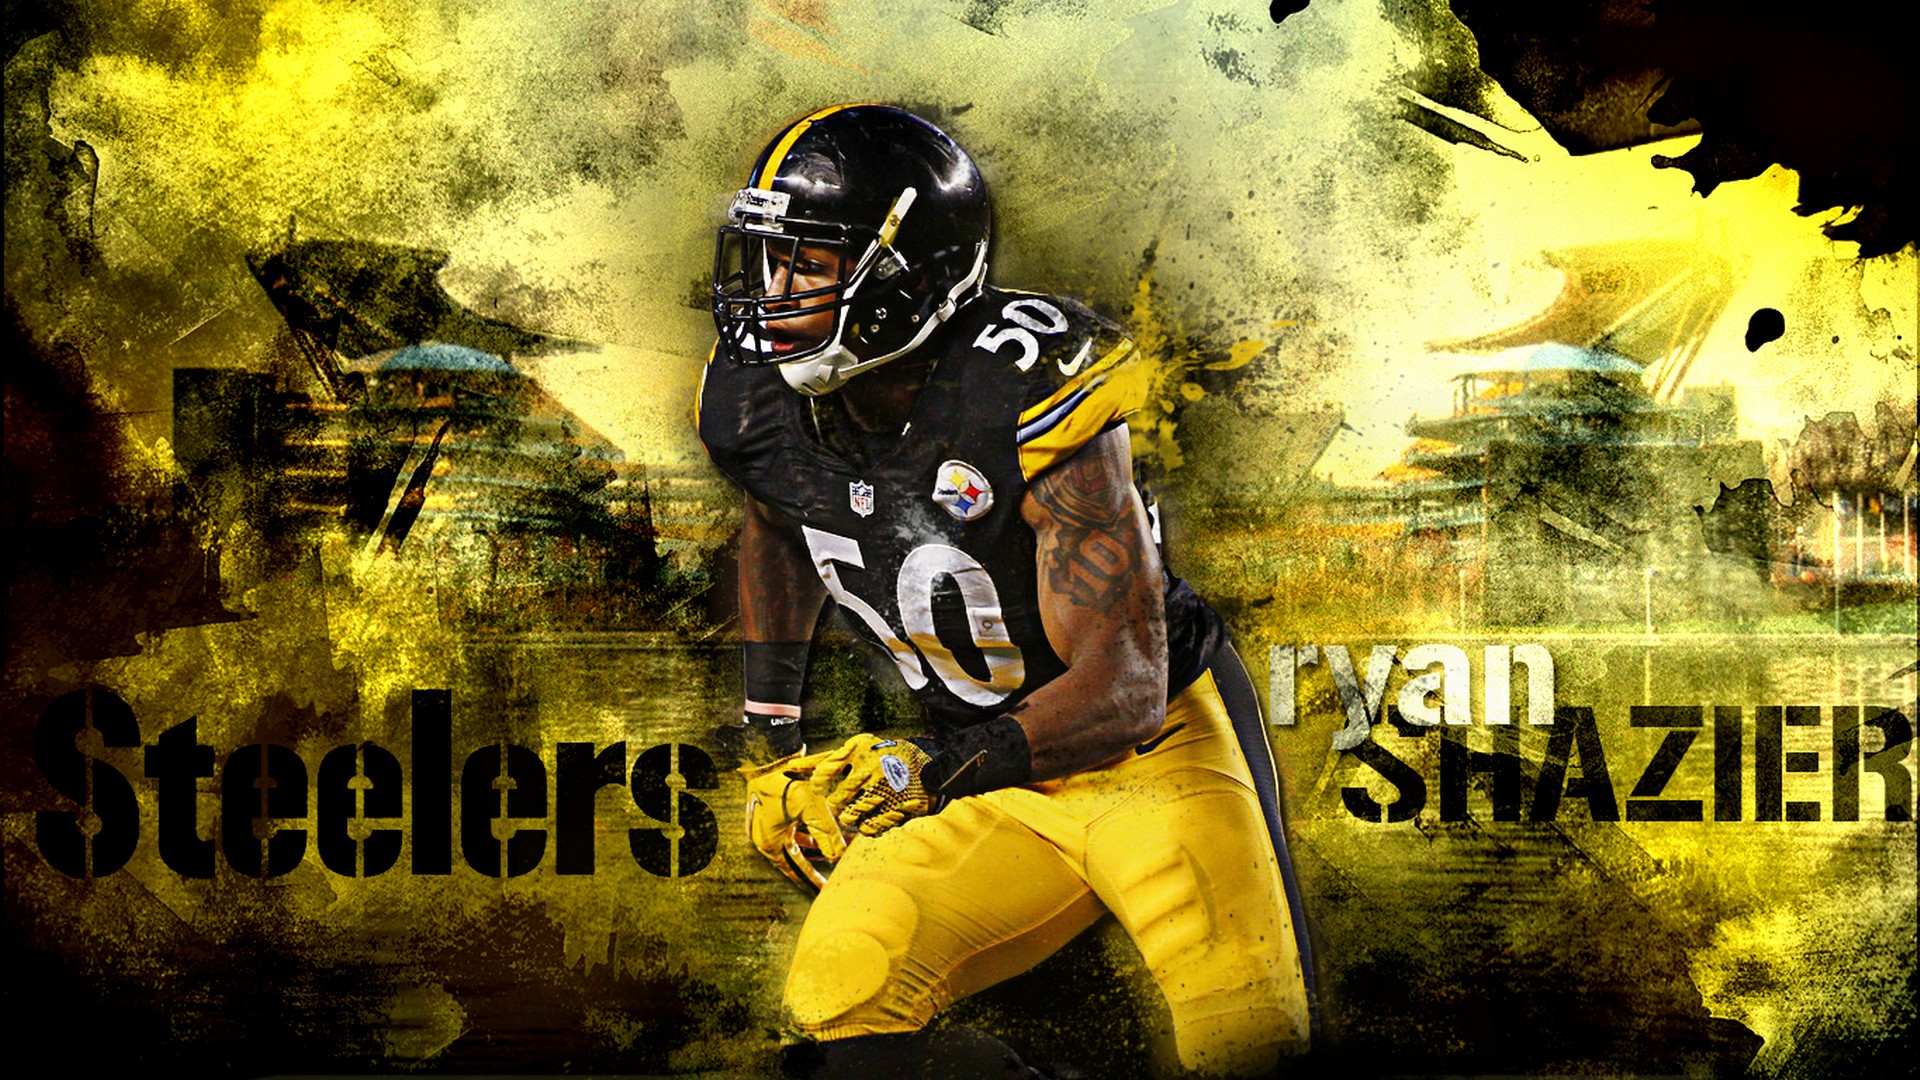 HD Desktop Wallpaper Steelers With Resolution 1920X1080 pixel. You can make this wallpaper for your Mac or Windows Desktop Background, iPhone, Android or Tablet and another Smartphone device for free